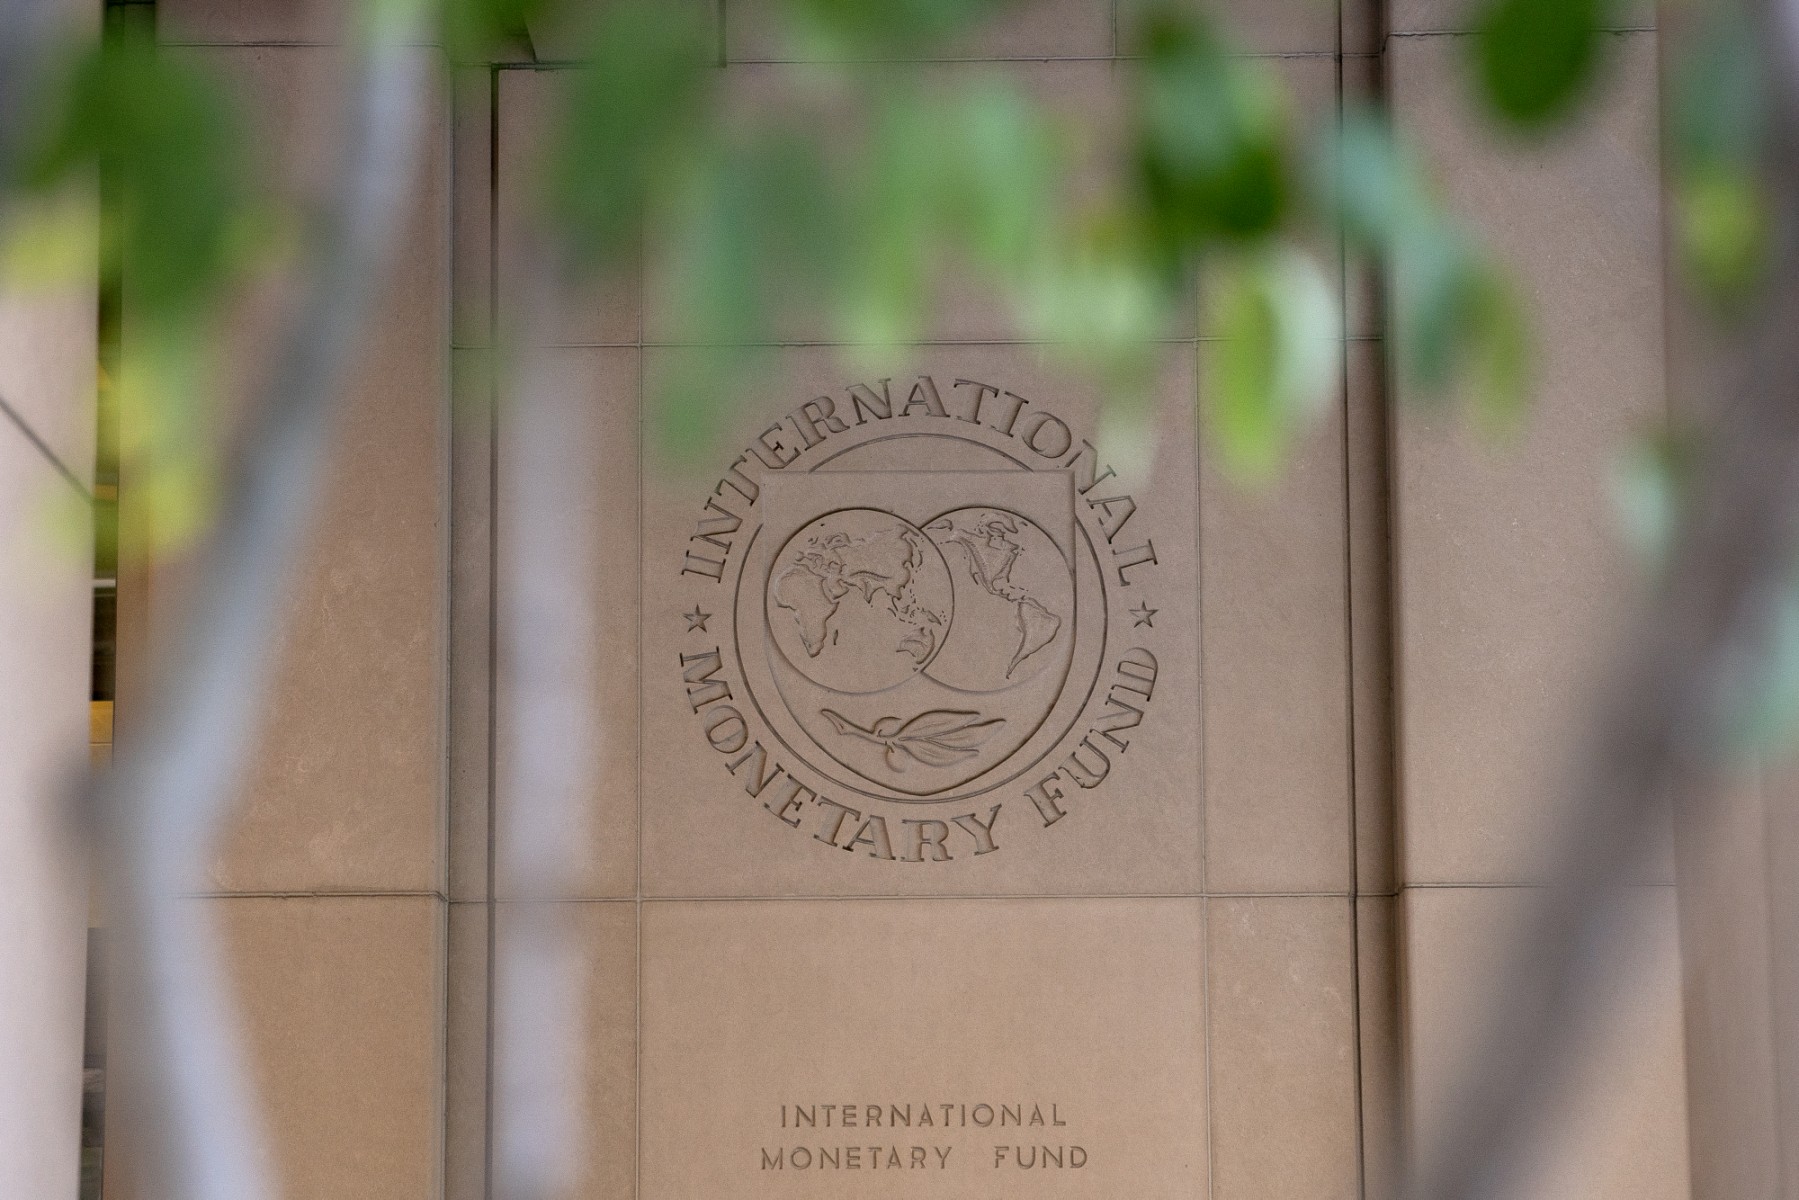 IMF announces ongoing talks with Egypt regarding potential additional financing